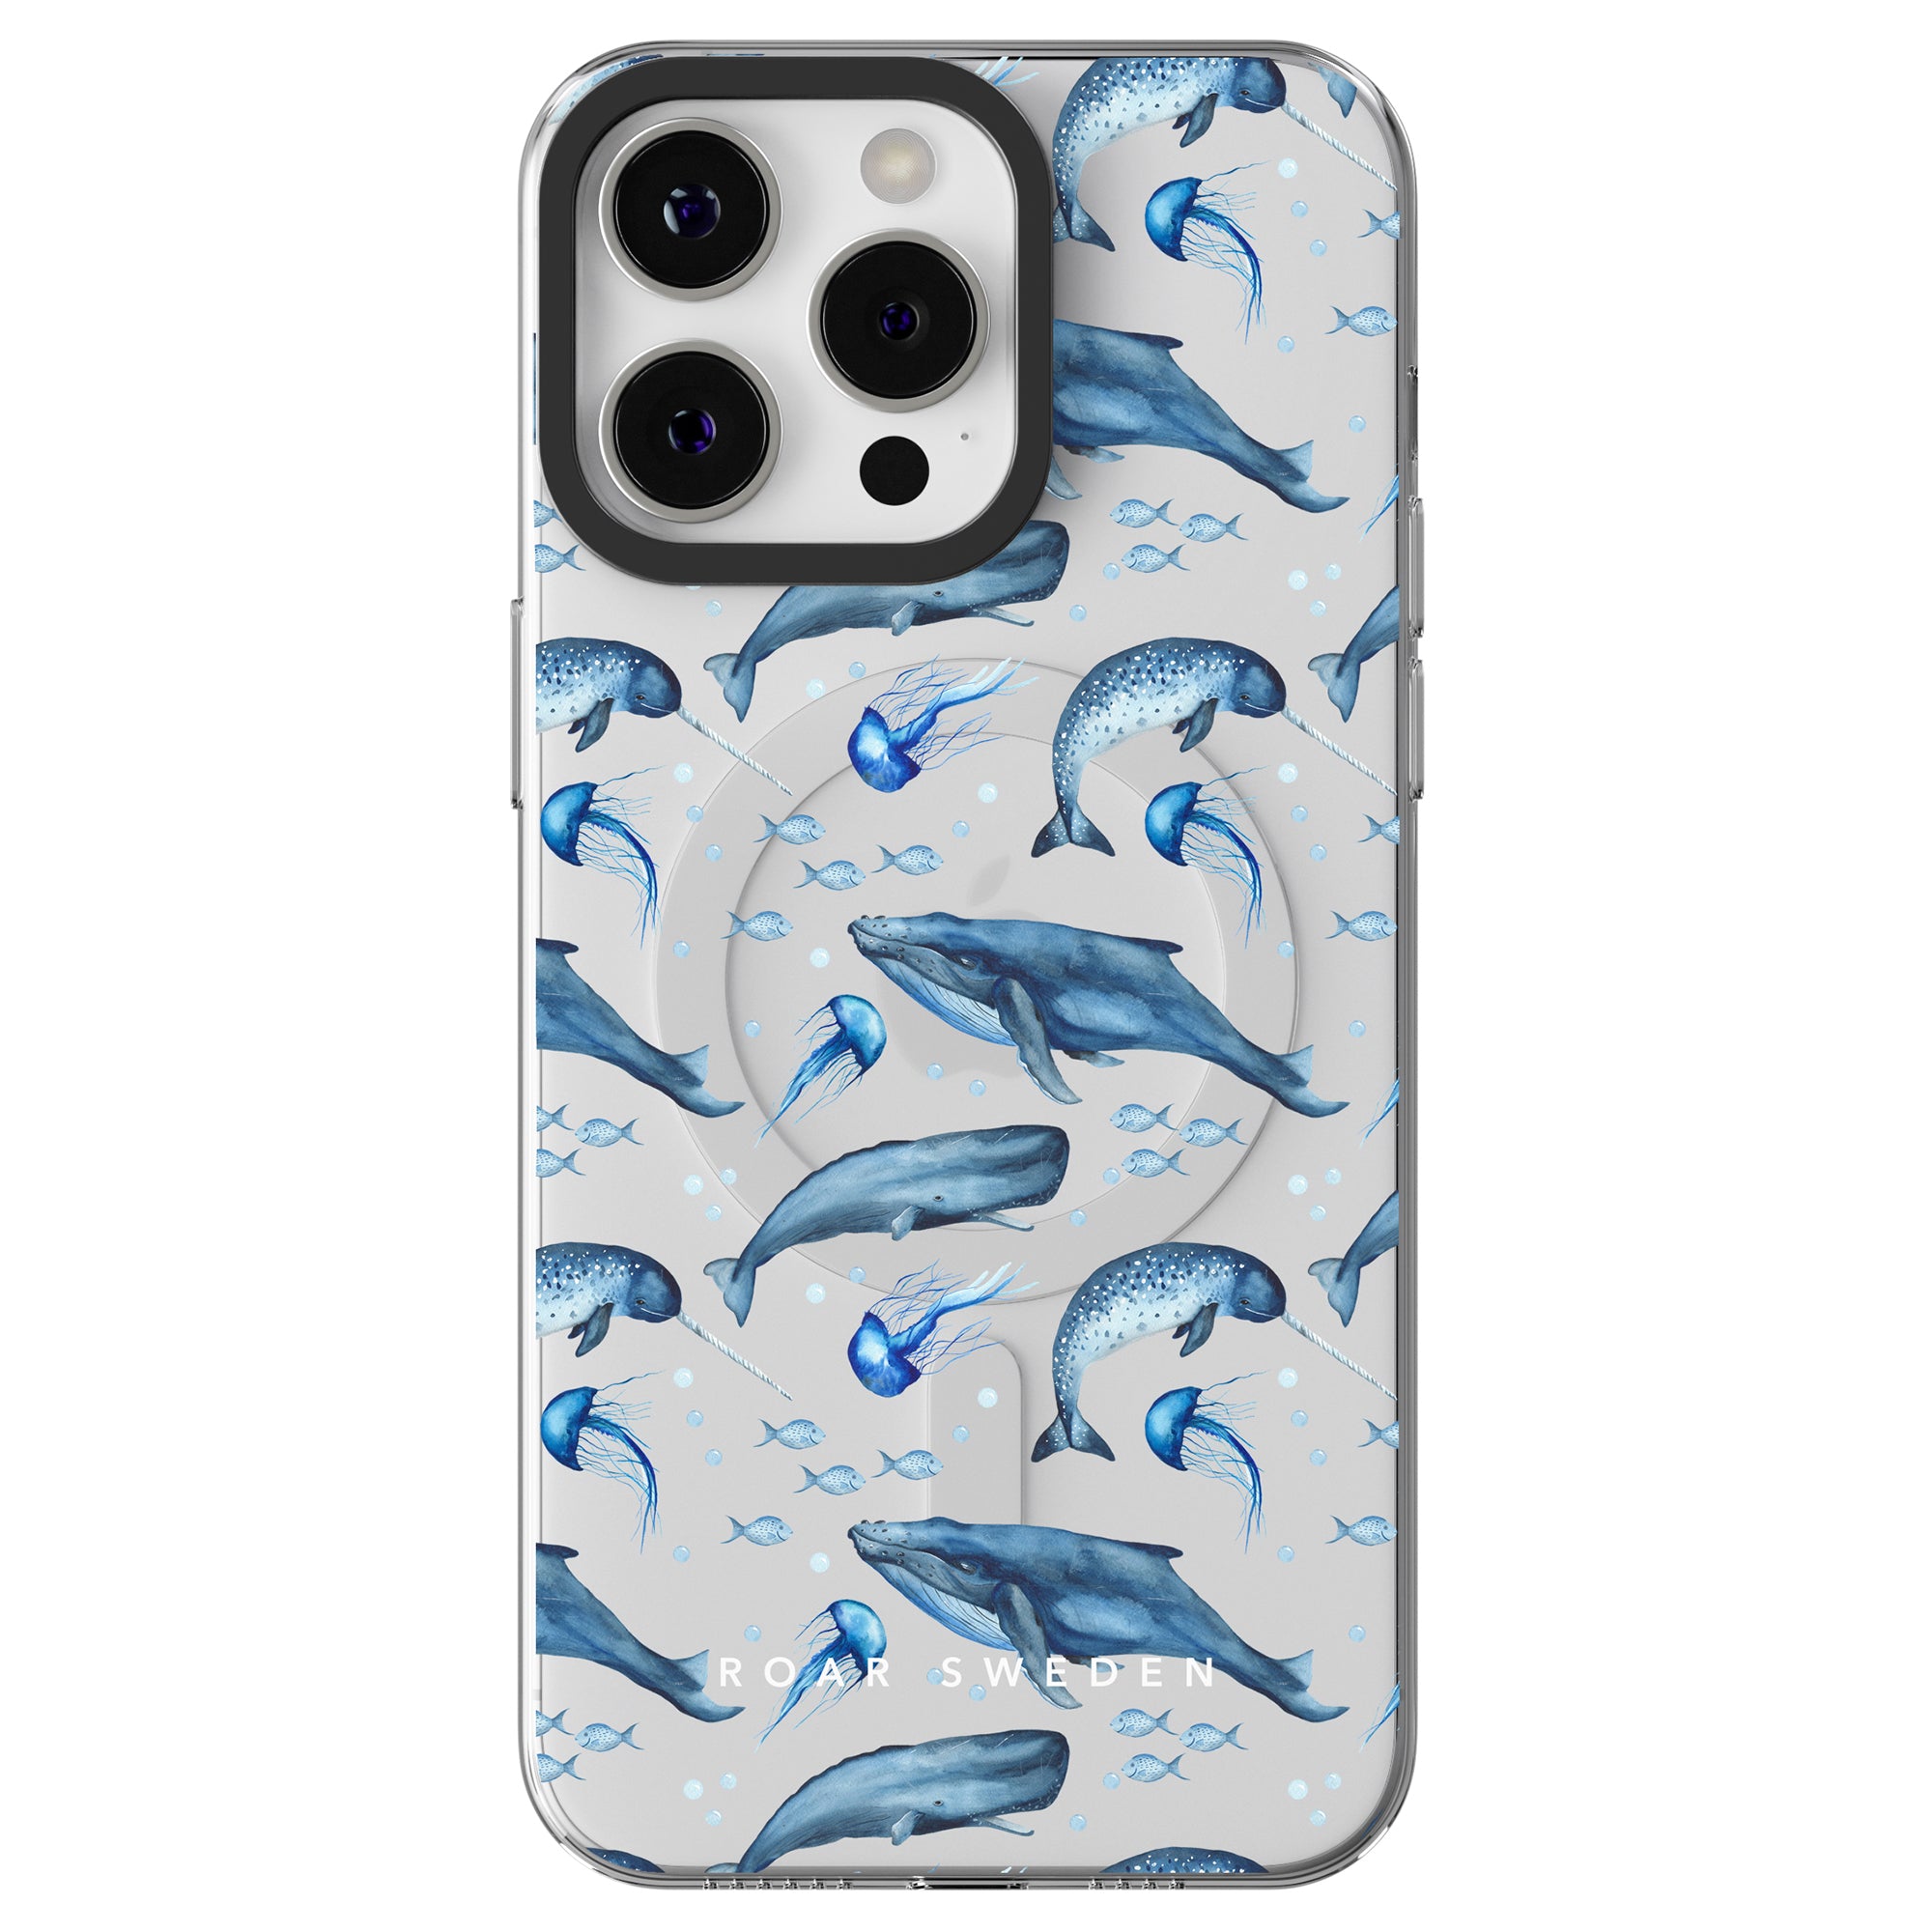 Phone case from the Ocean-kollektion featuring a pattern of whales and jellyfish on a light background, with three rear camera lenses and the text "ROAR SWEDEN" at the bottom. This Cetacea - MagSafe showcases undervattensvärldens skönhet beautifully.